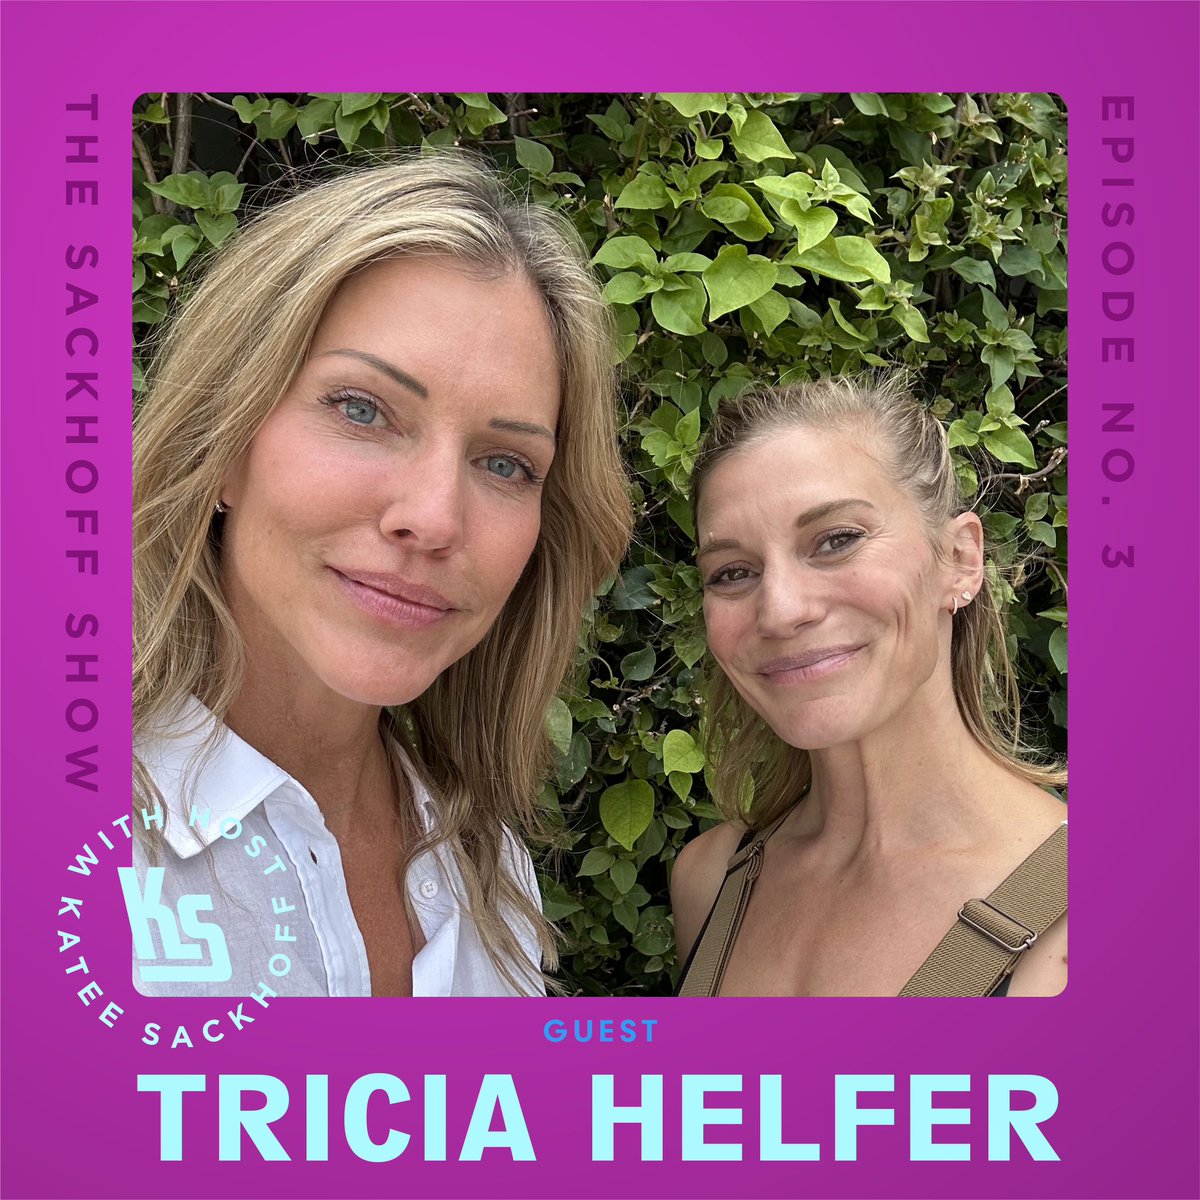 New podcast episode alert 🚨 @trutriciahelfer came into the studio to chat. This is one of the older episodes so it has video you can watch here youtu.be/YrREnjQgvxg?si… The audio is available EVERYWHERE you get your podcasts. @ApplePodcasts @spotifypodcasts @kateesackhoff